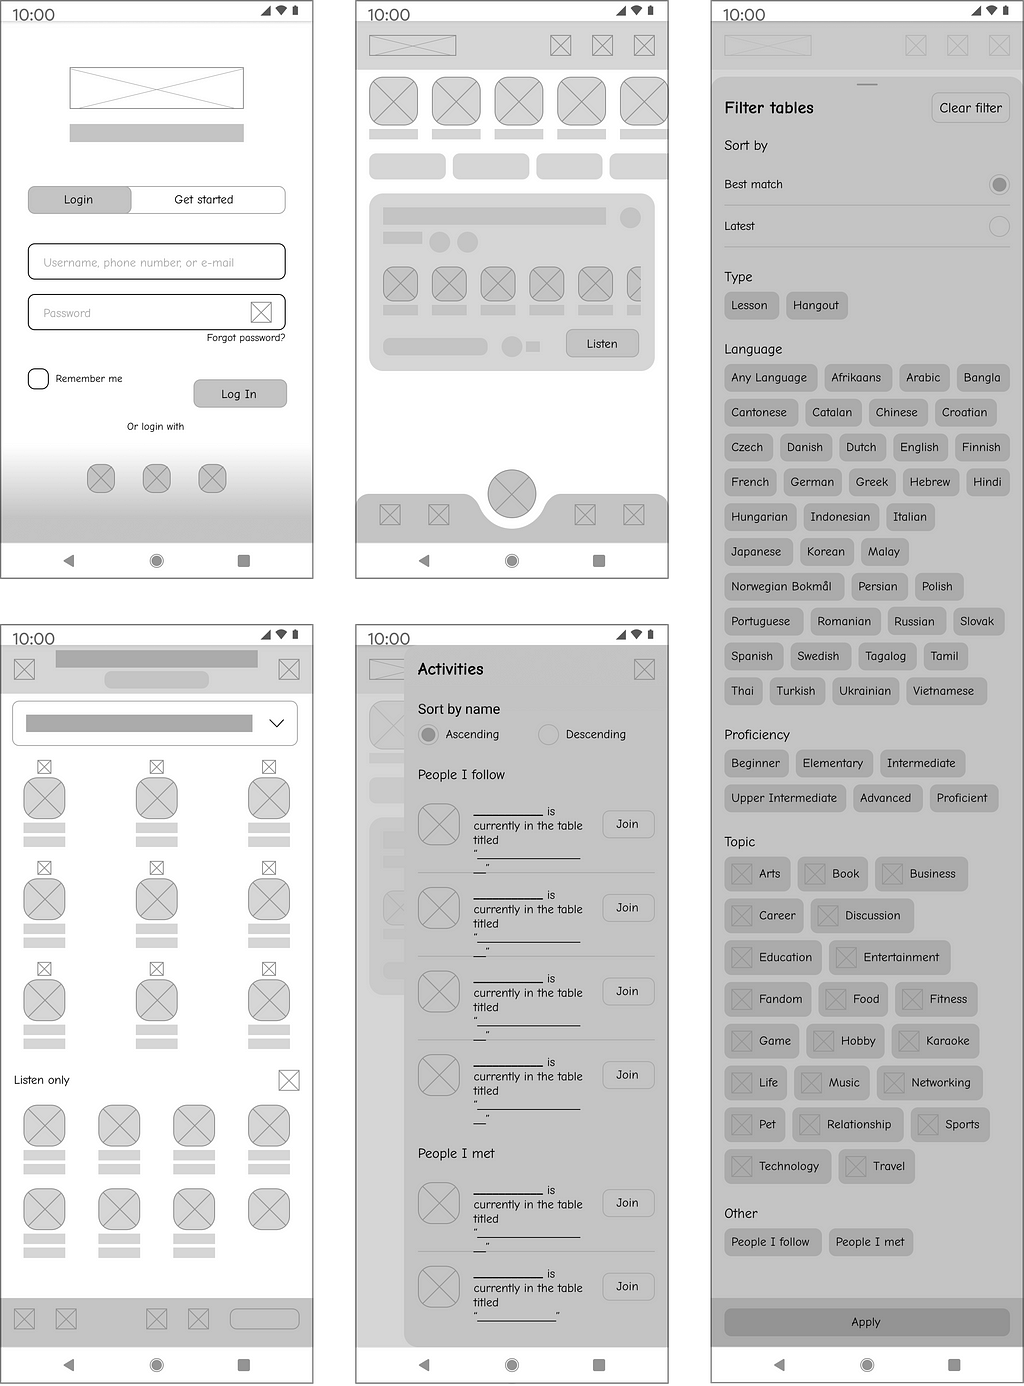 Wireframes resulting from the sketches that have been created